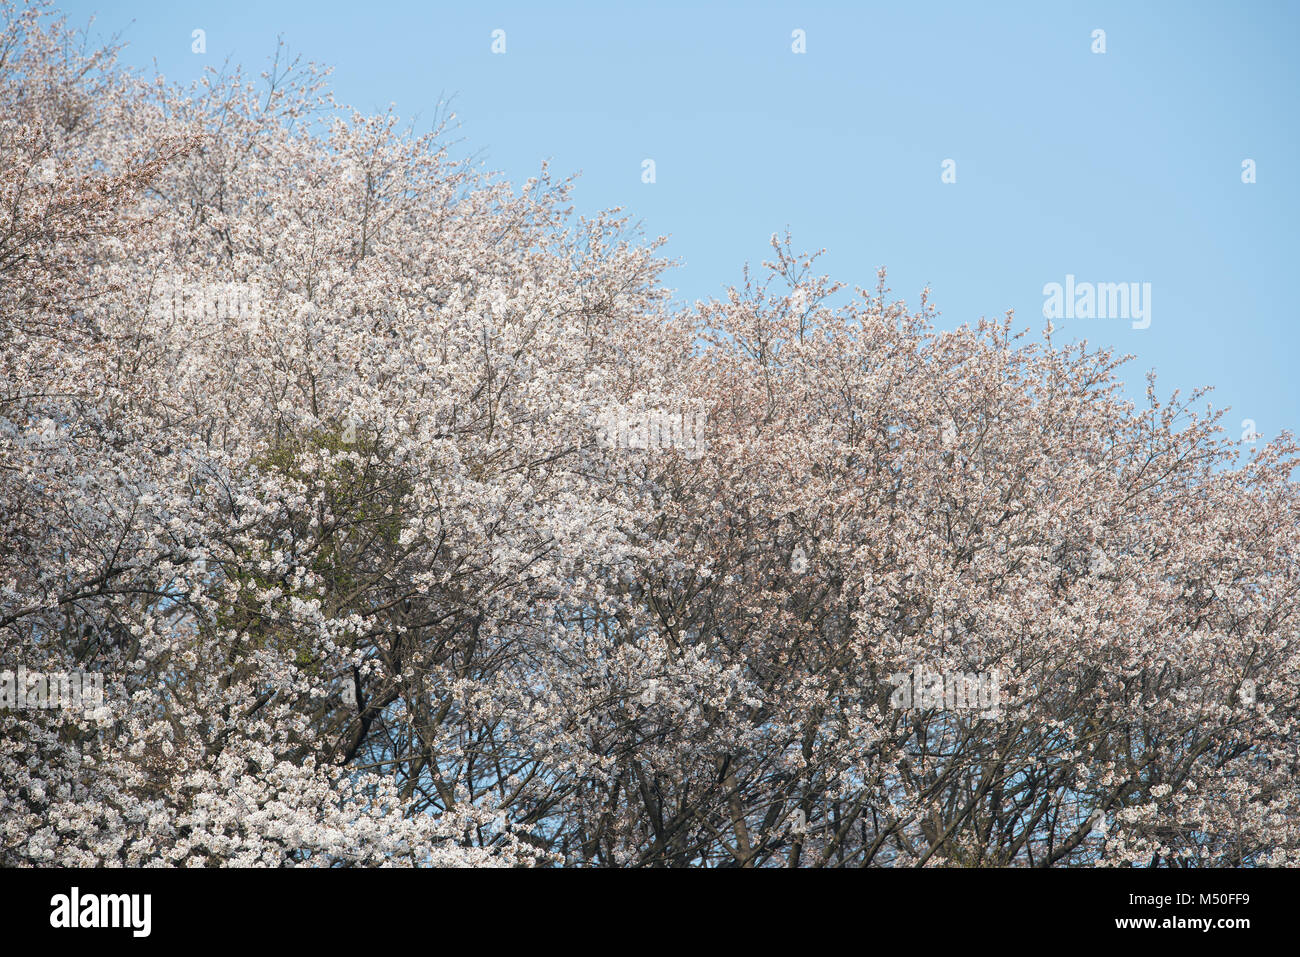 Cherry blossoms in March Stock Photo